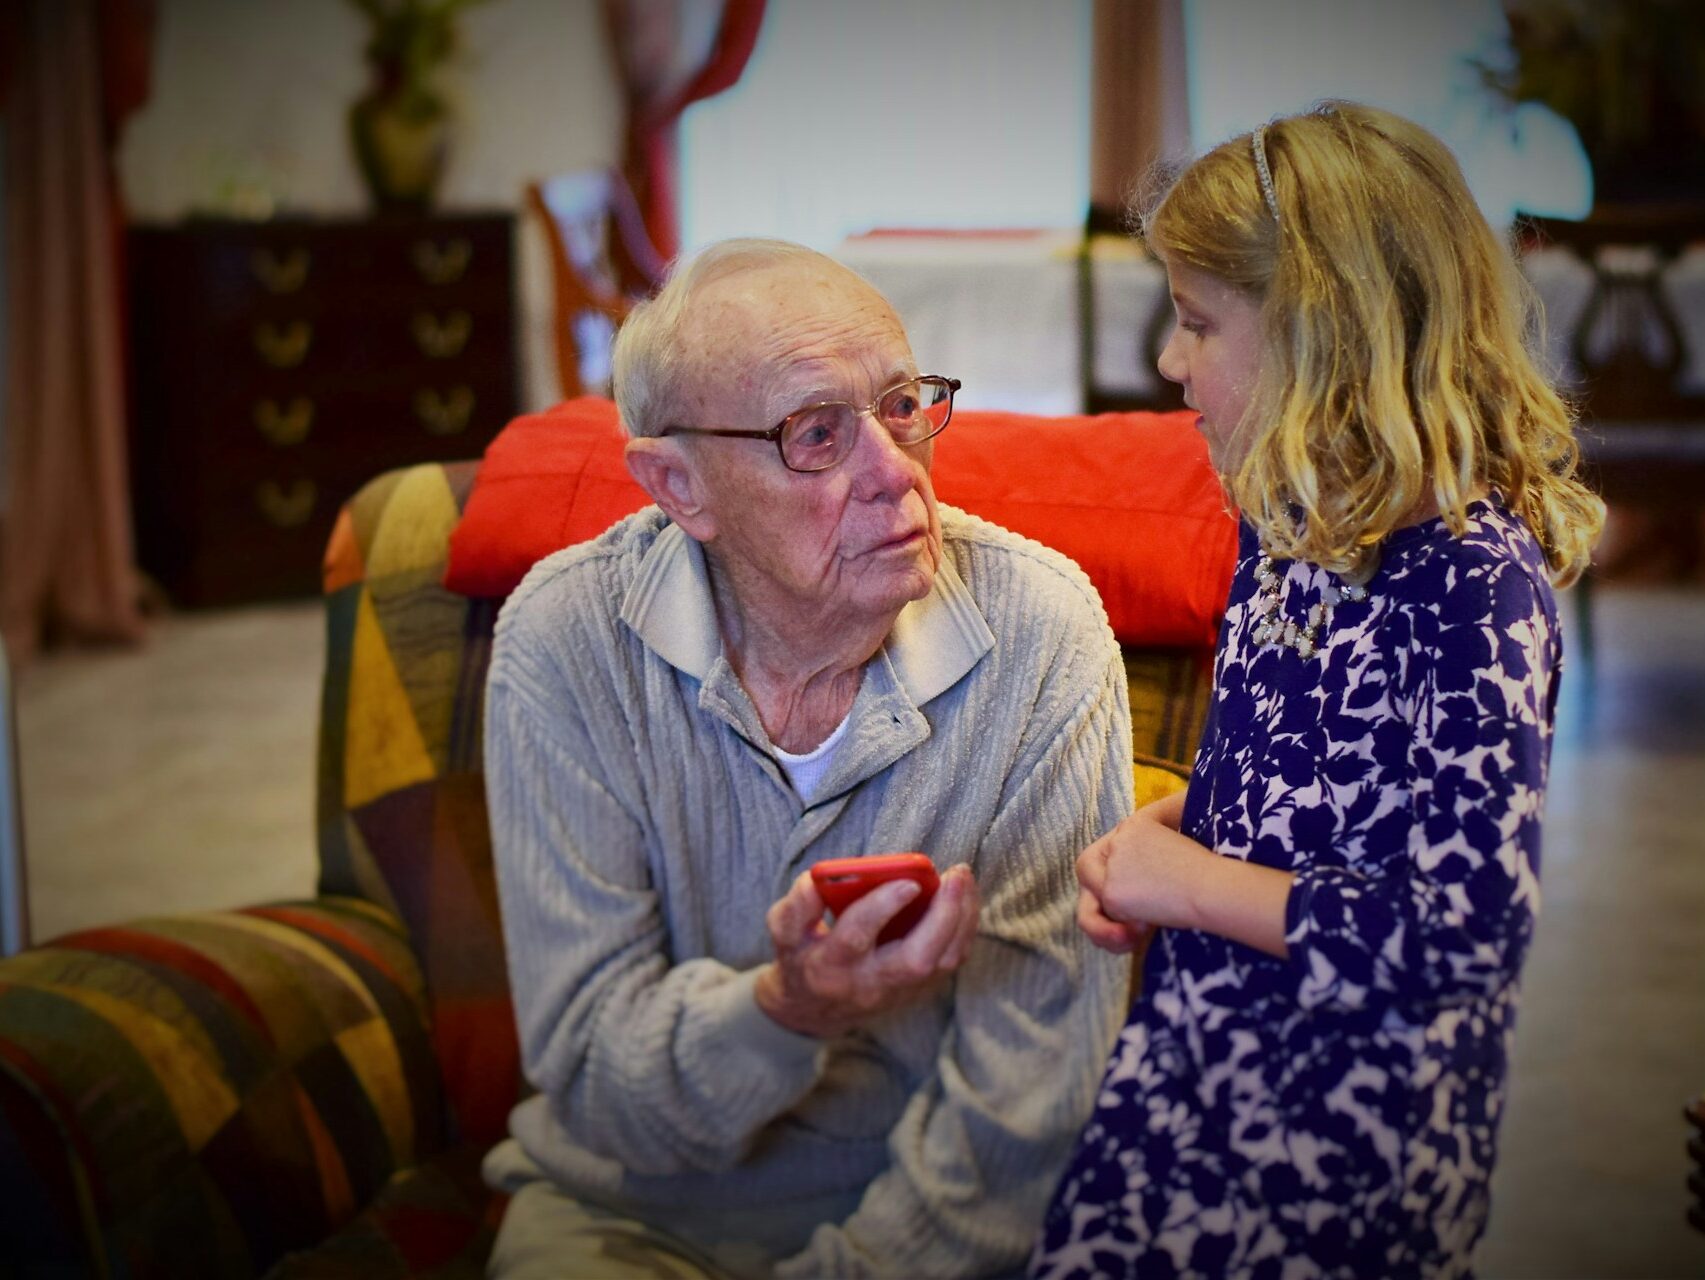 a grandfather speaking and sharing an apple with his granddaughter